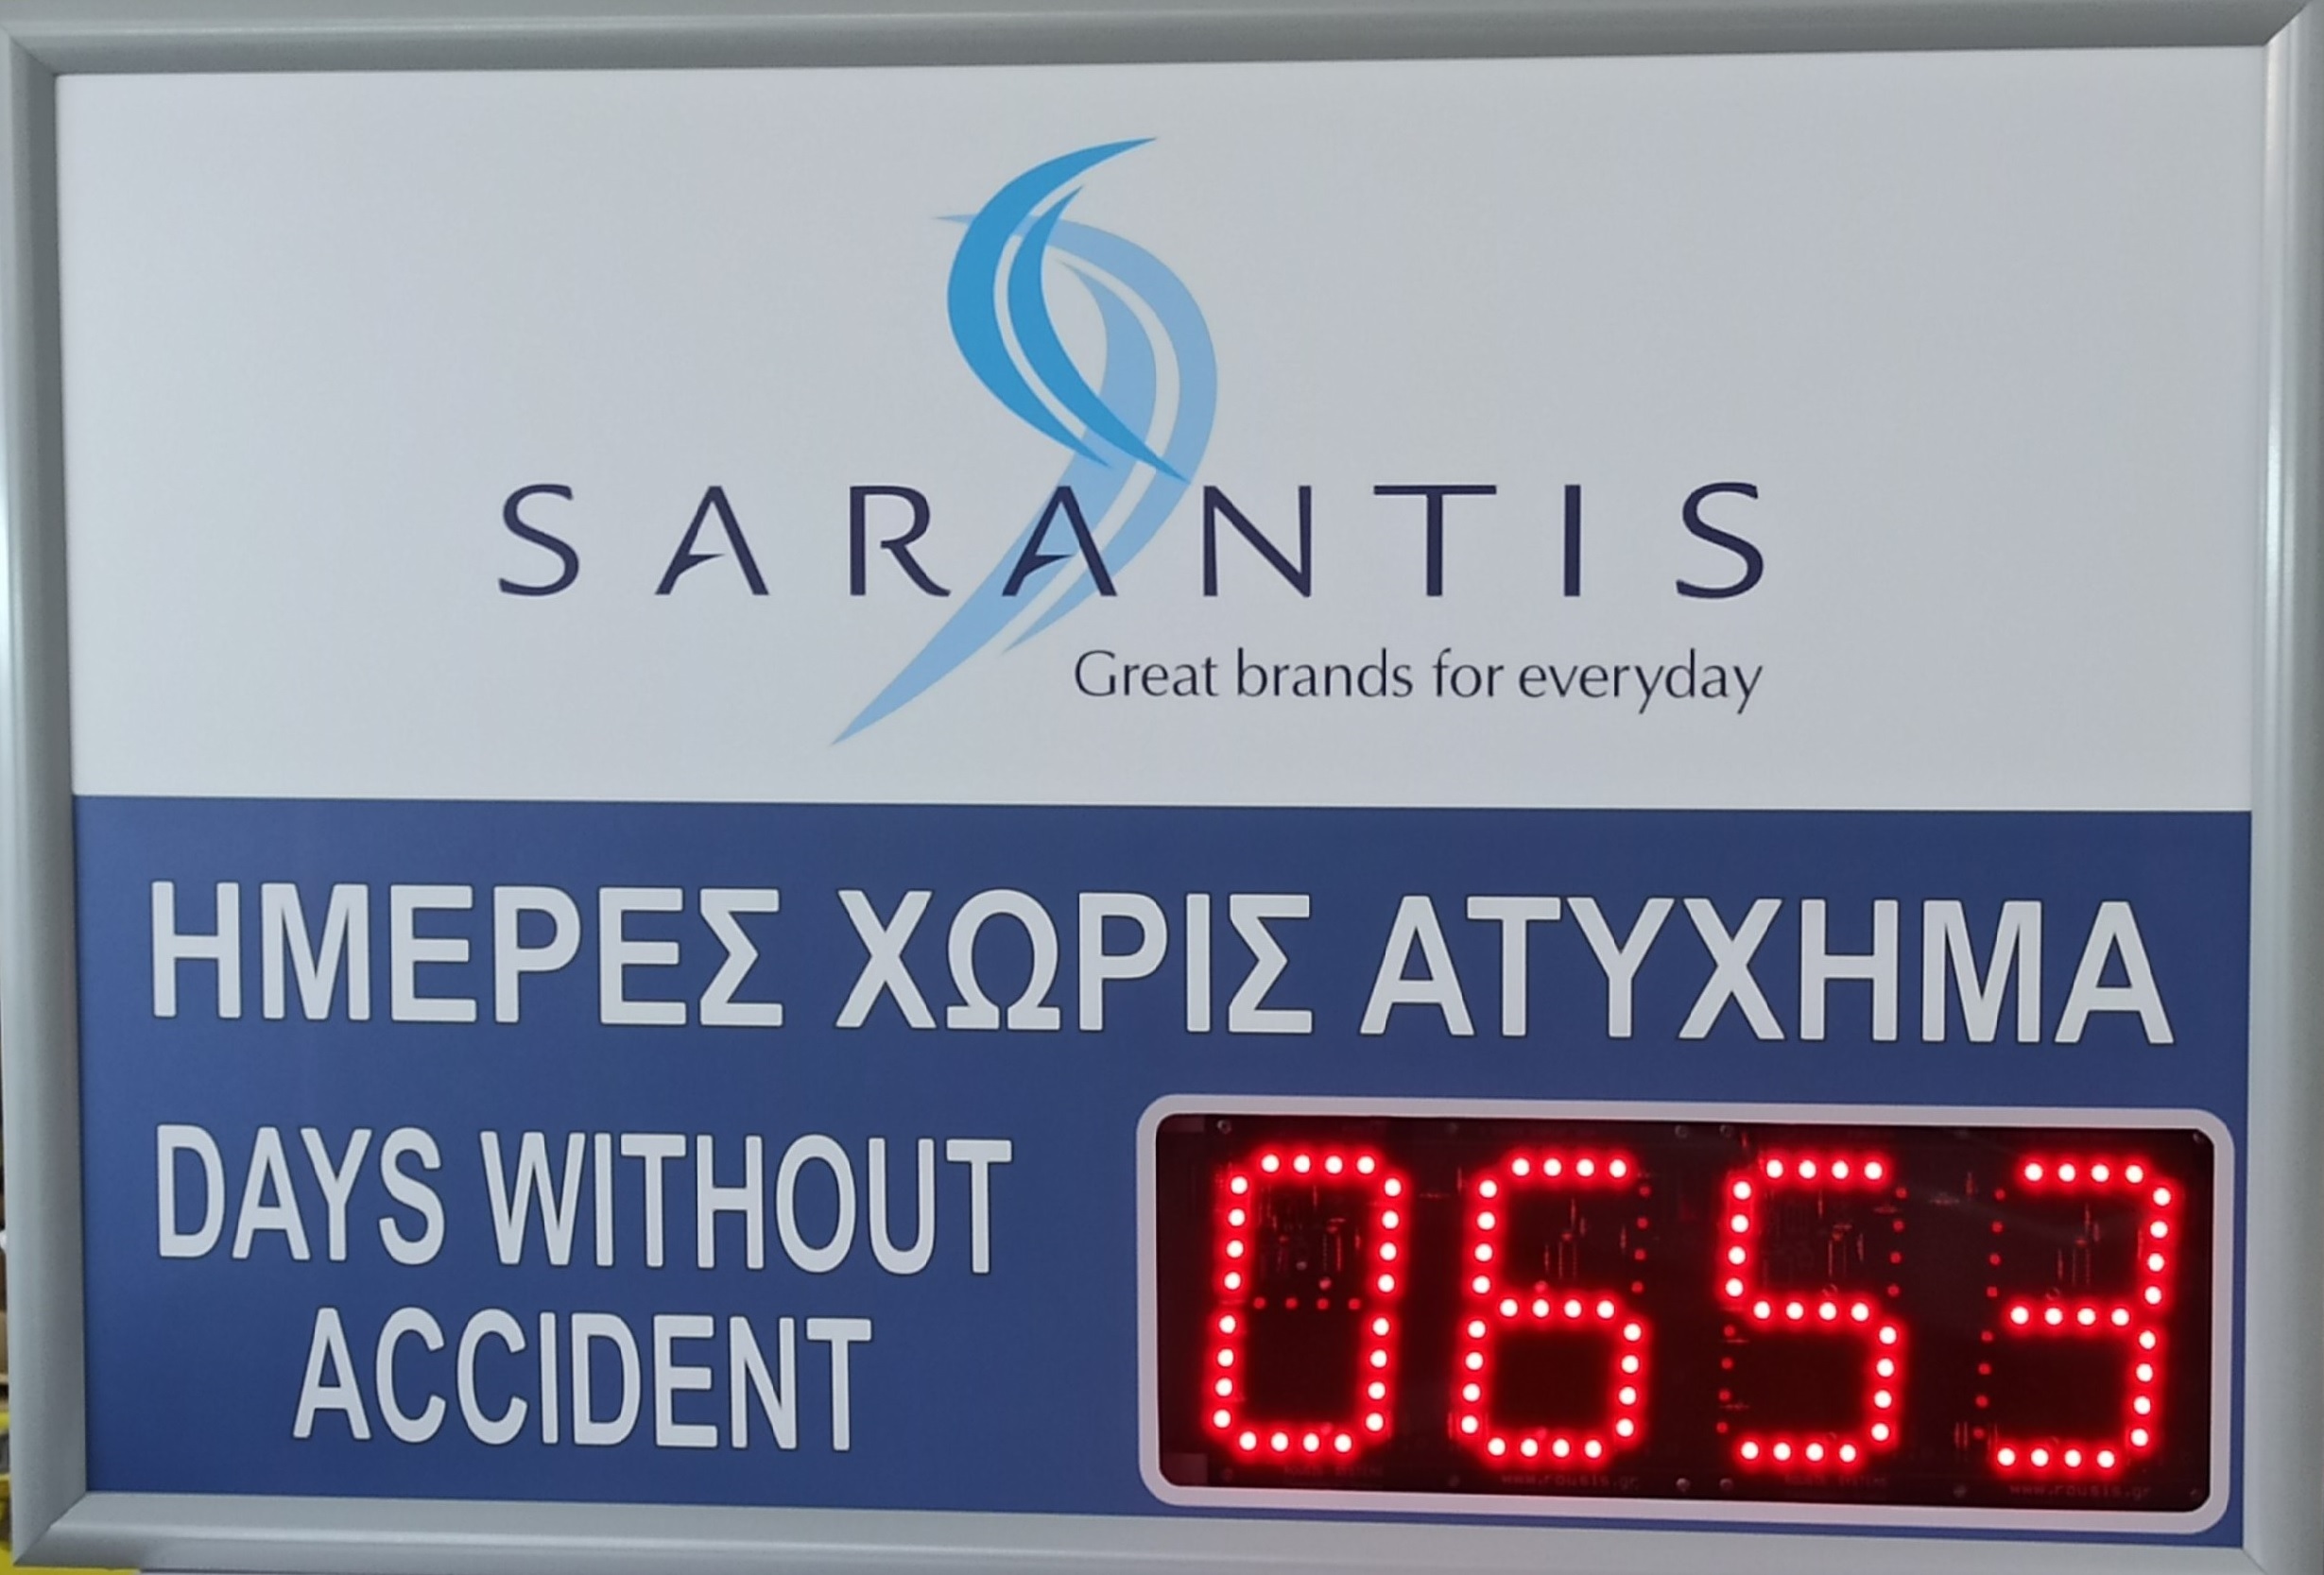 days_without_accident.jpg